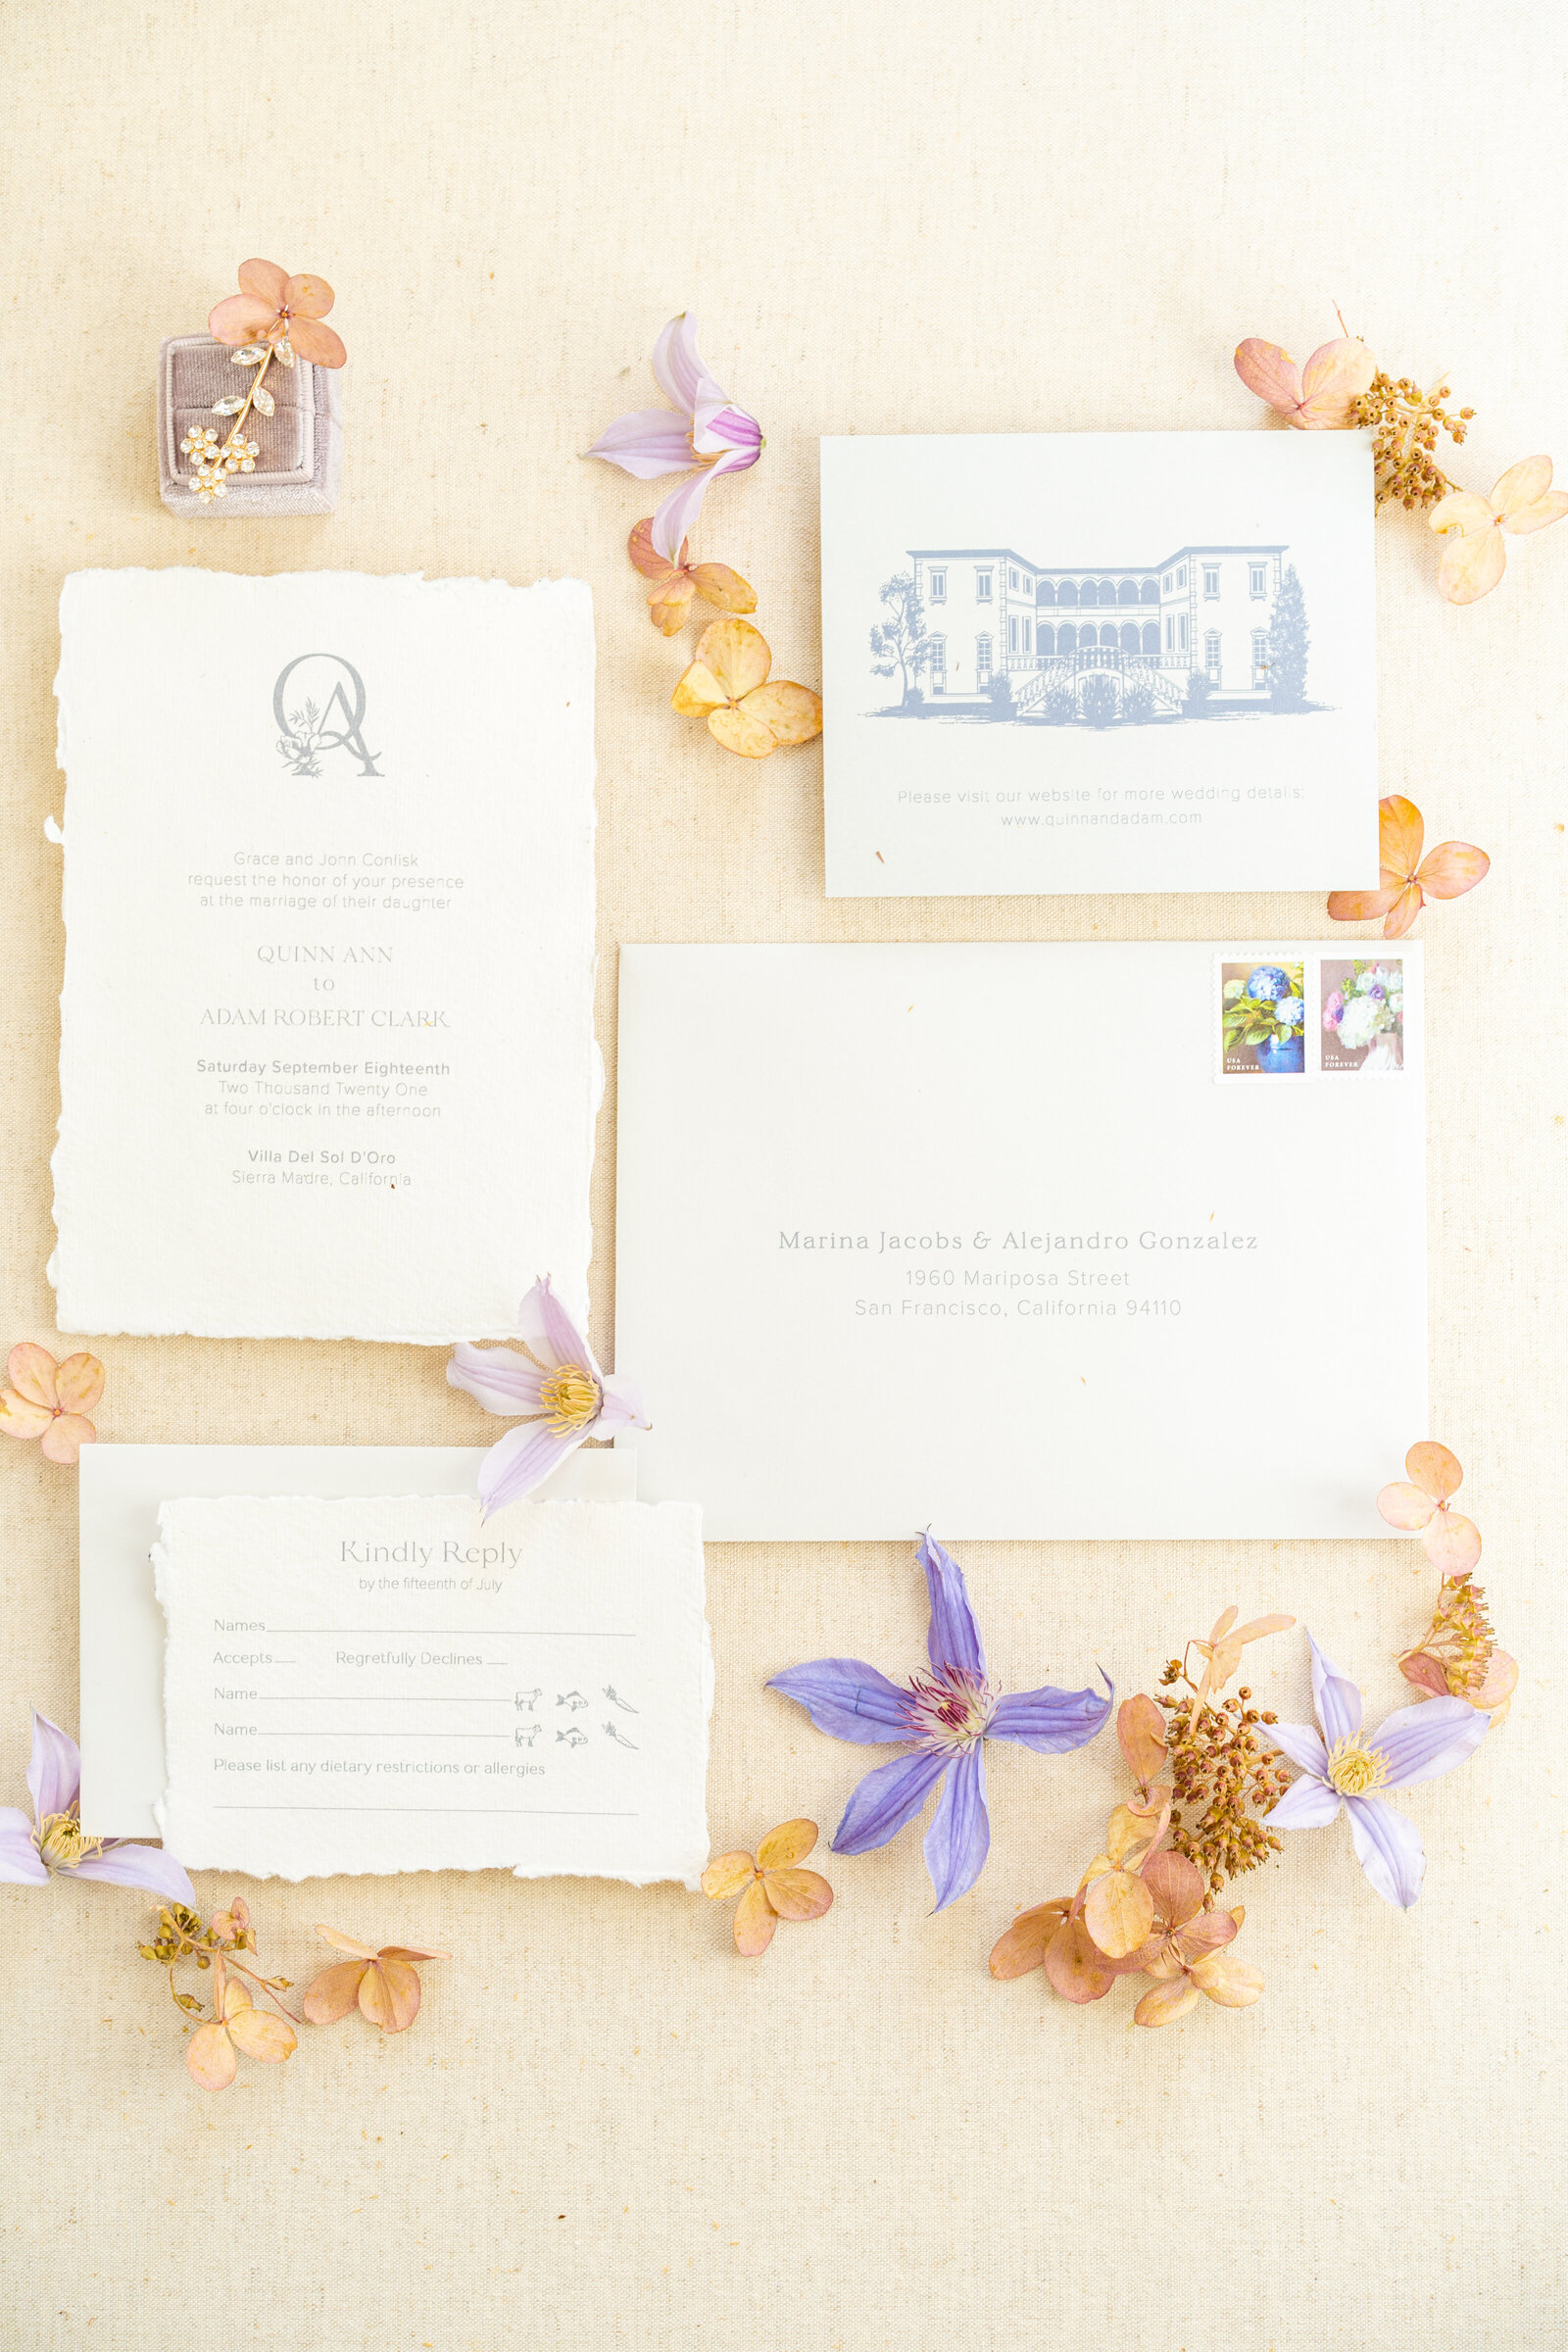 Wedding stationery on white card stock with gray font, flowers and earrings set atop a cream background.